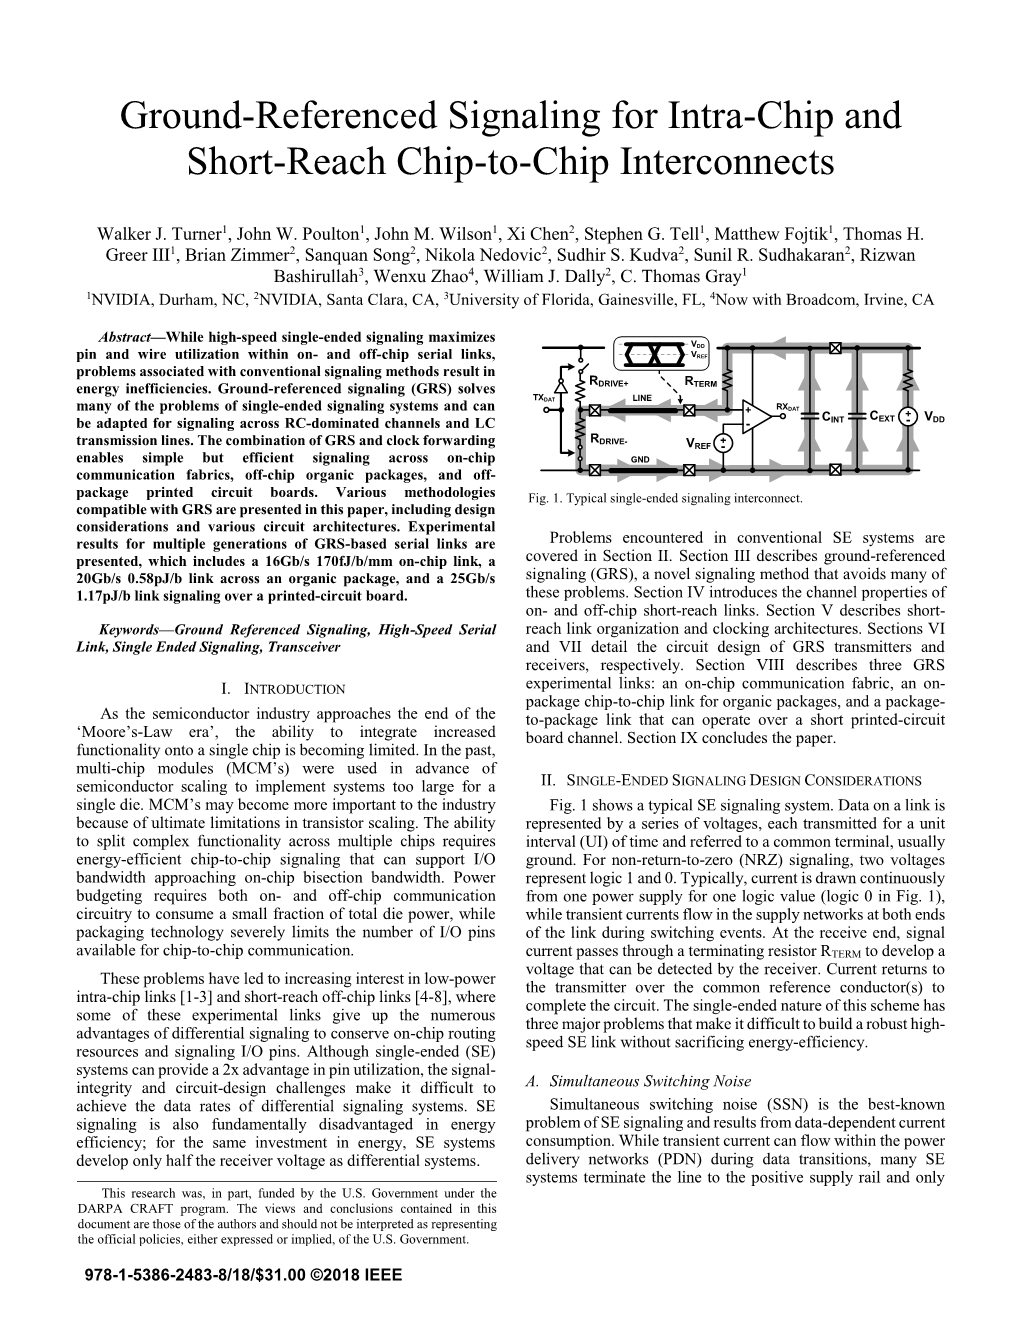 Ground-Referenced Signaling for Intra-Chip and Short-Reach Chip-To-Chip Interconnects